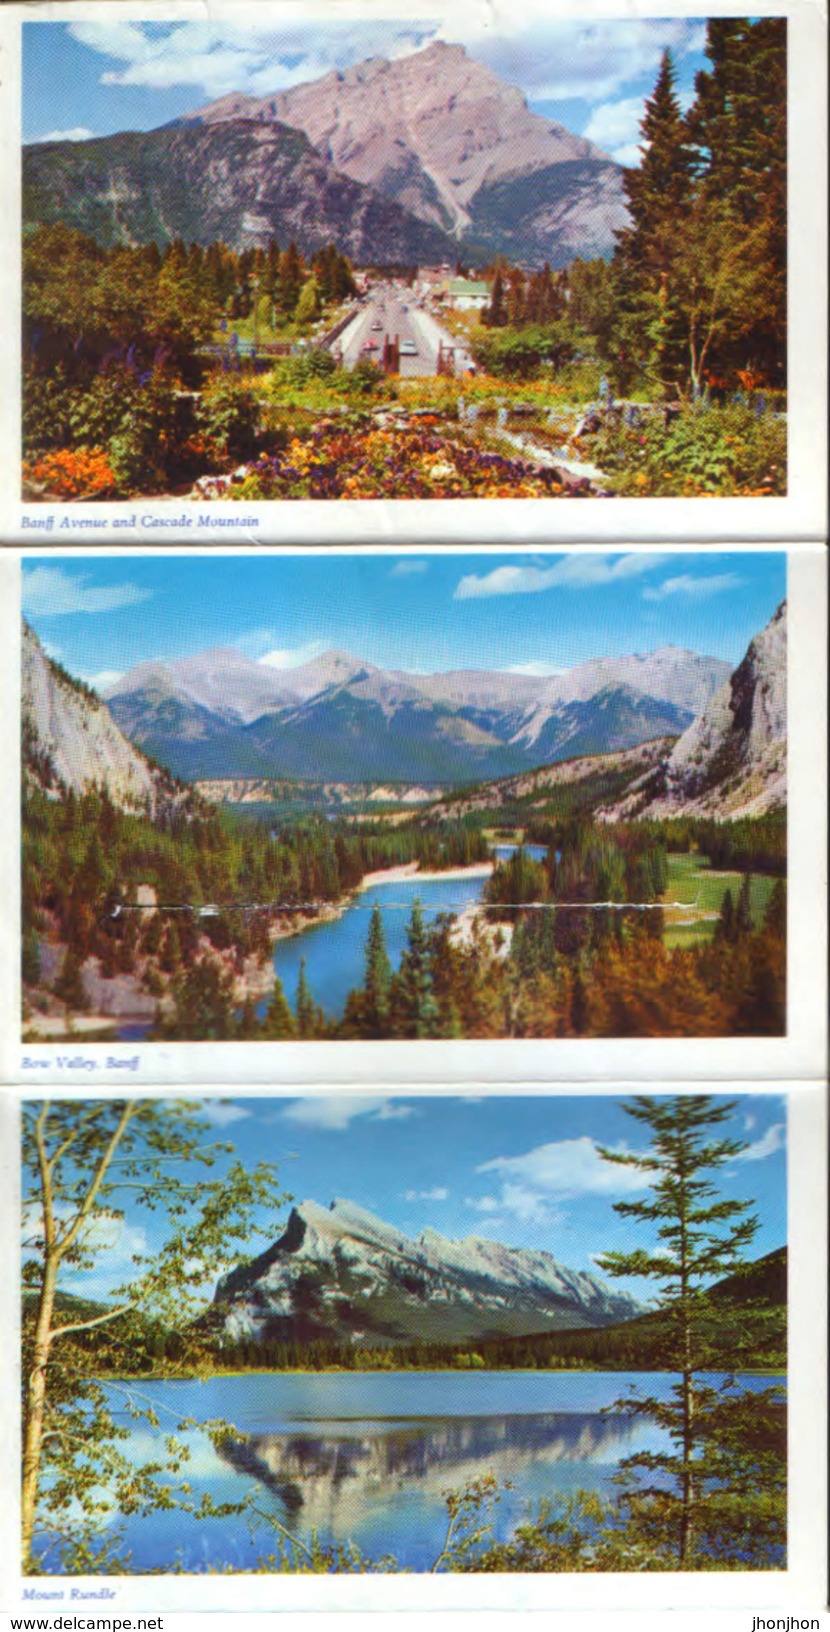 Canada  - 14 Postcards "leporello" circulated 1963 - Canadian Rockies - Multipleviews - 8/scans